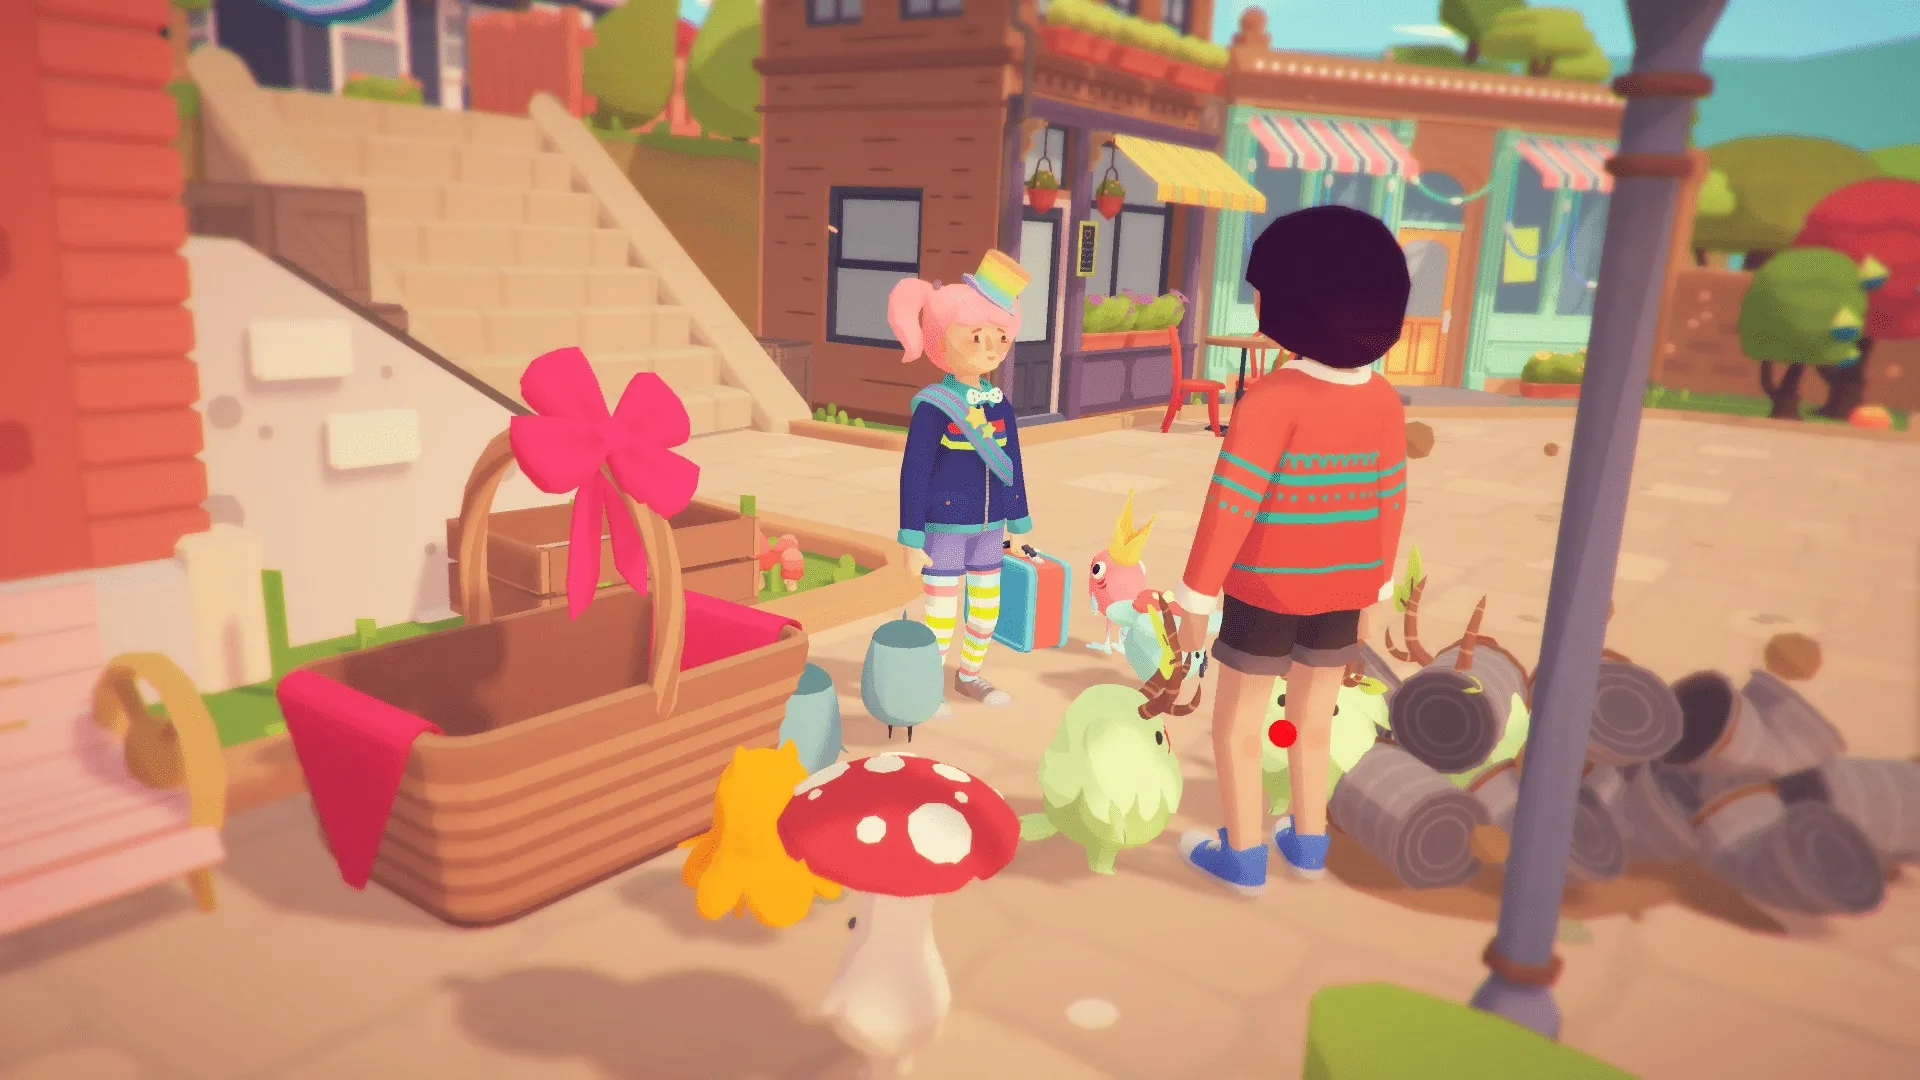 Ooblets from Glumberland offers animal rights, vegan diets, and true harmony of sentient living creatures. Ben Wasser elaborates in an interview.